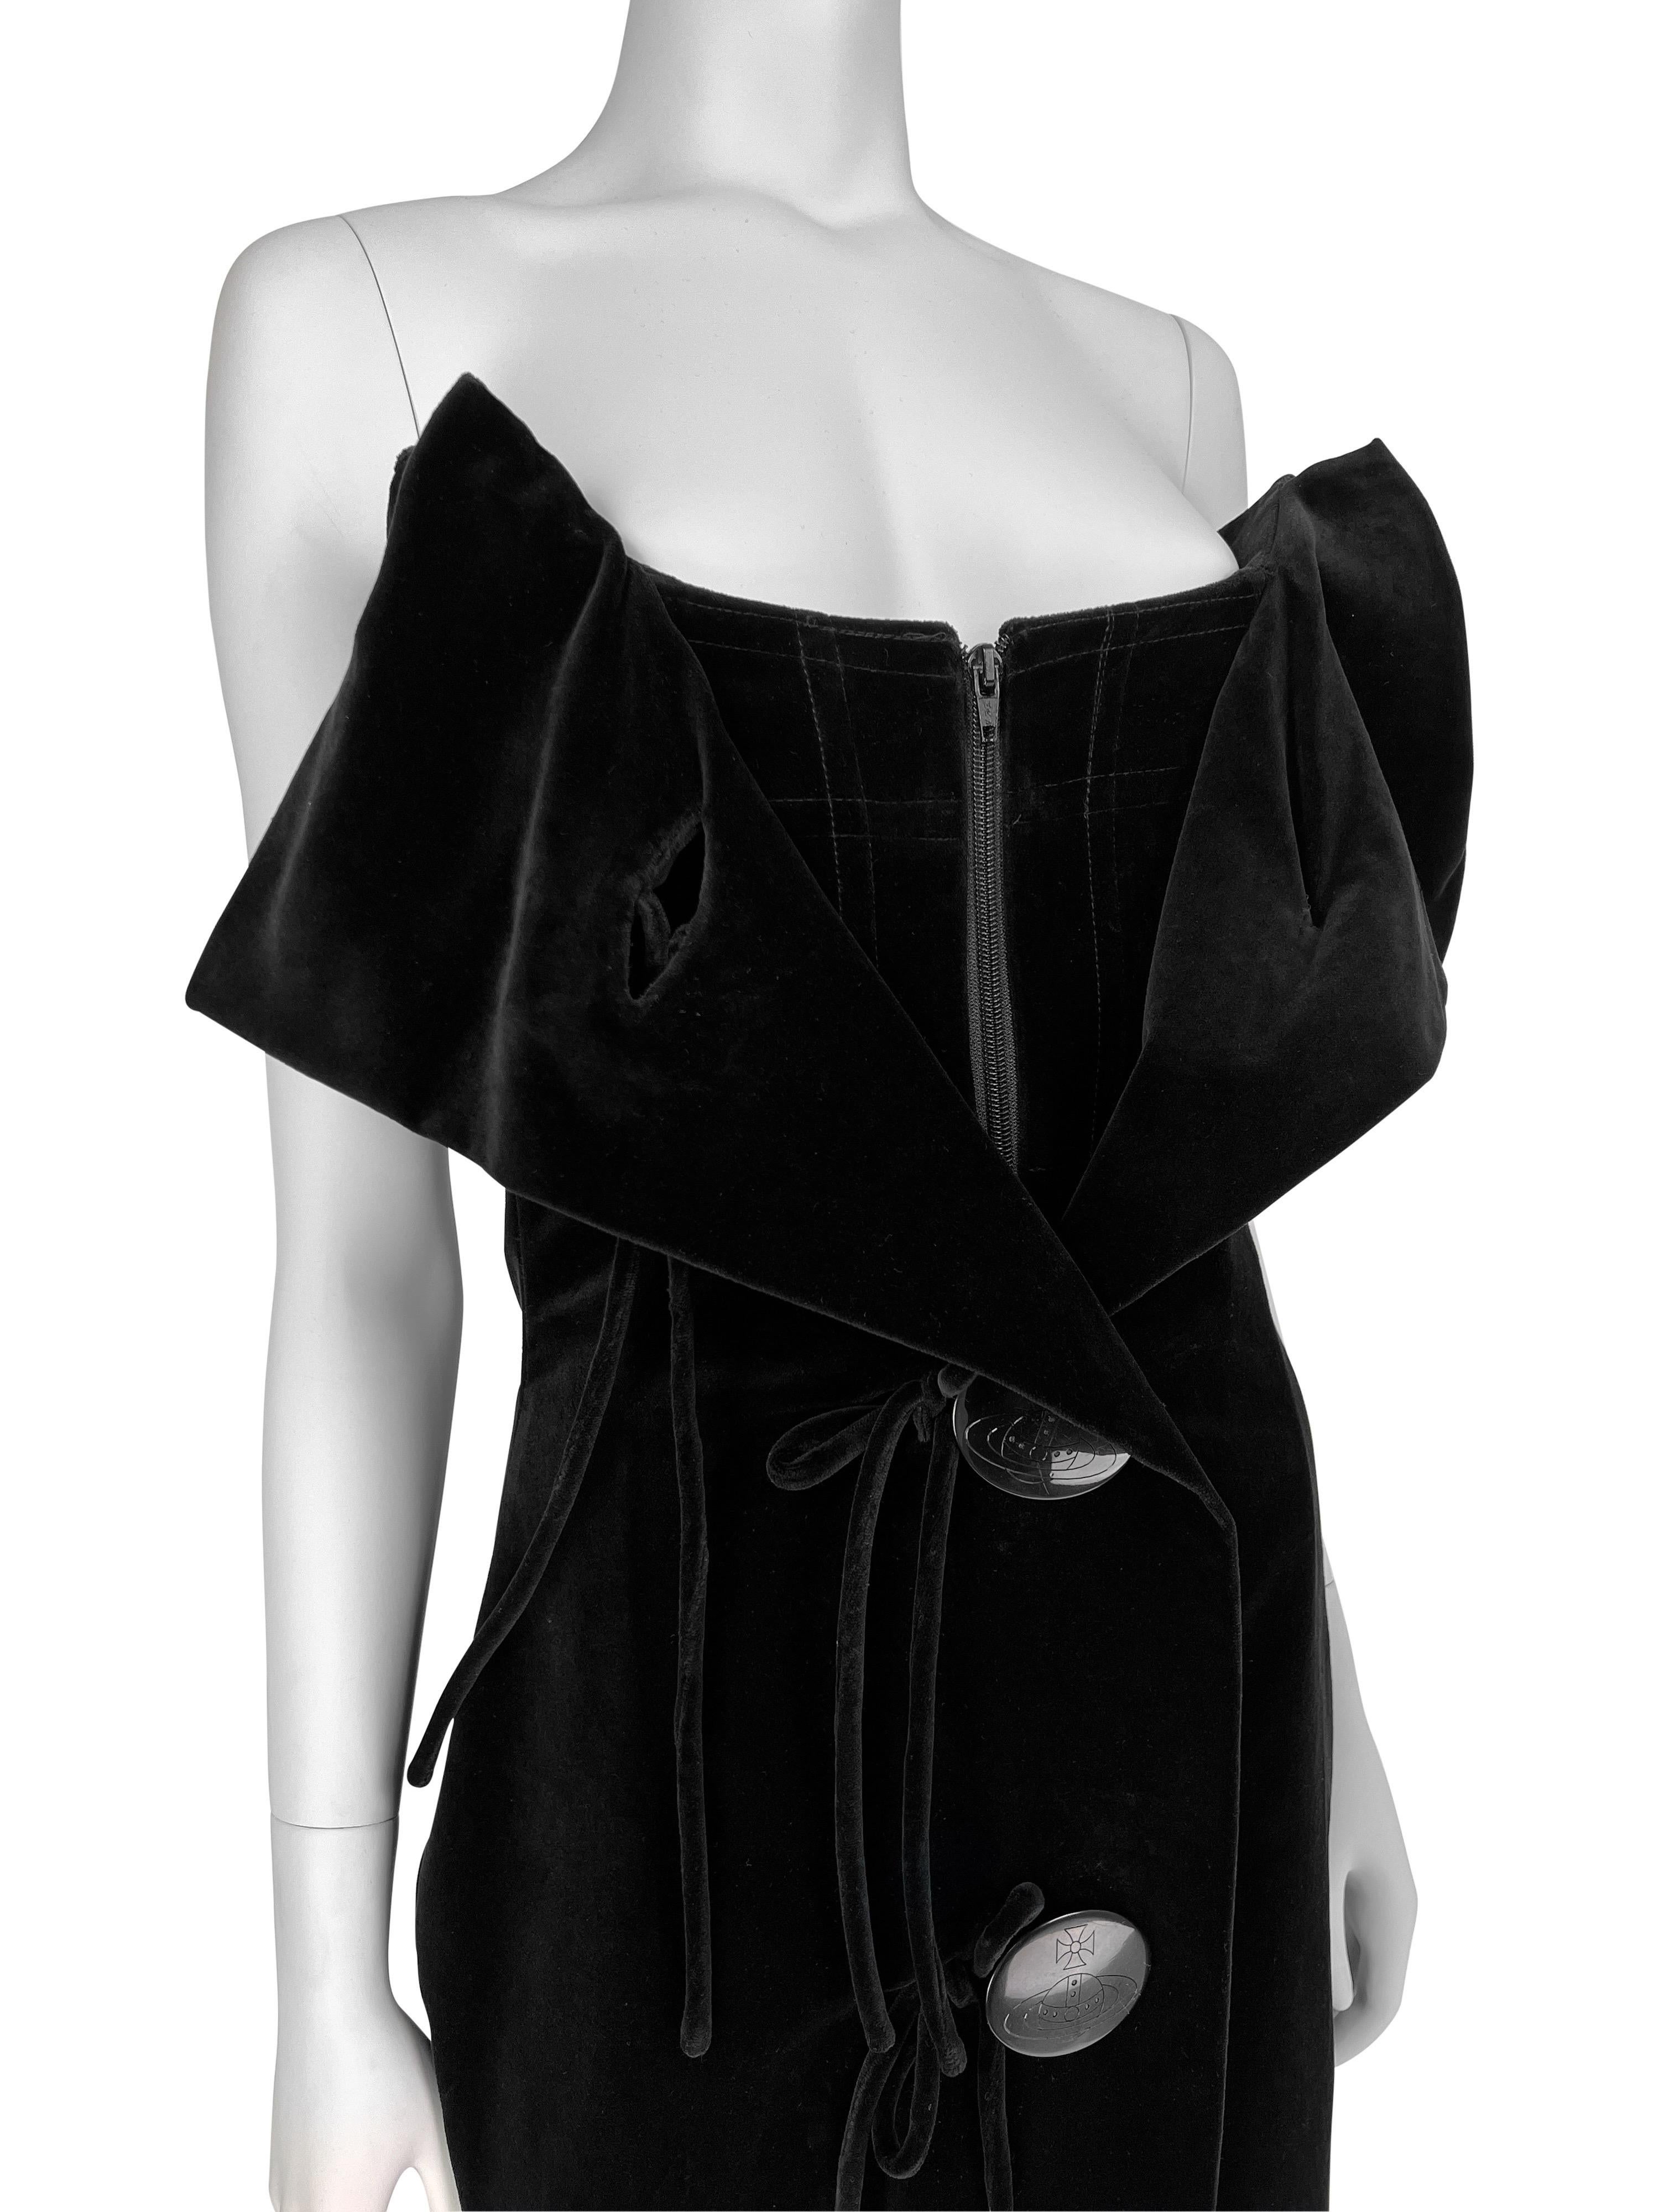 Fall 1998 Vivienne Westwood Corseted Velvet Dress For Sale 6